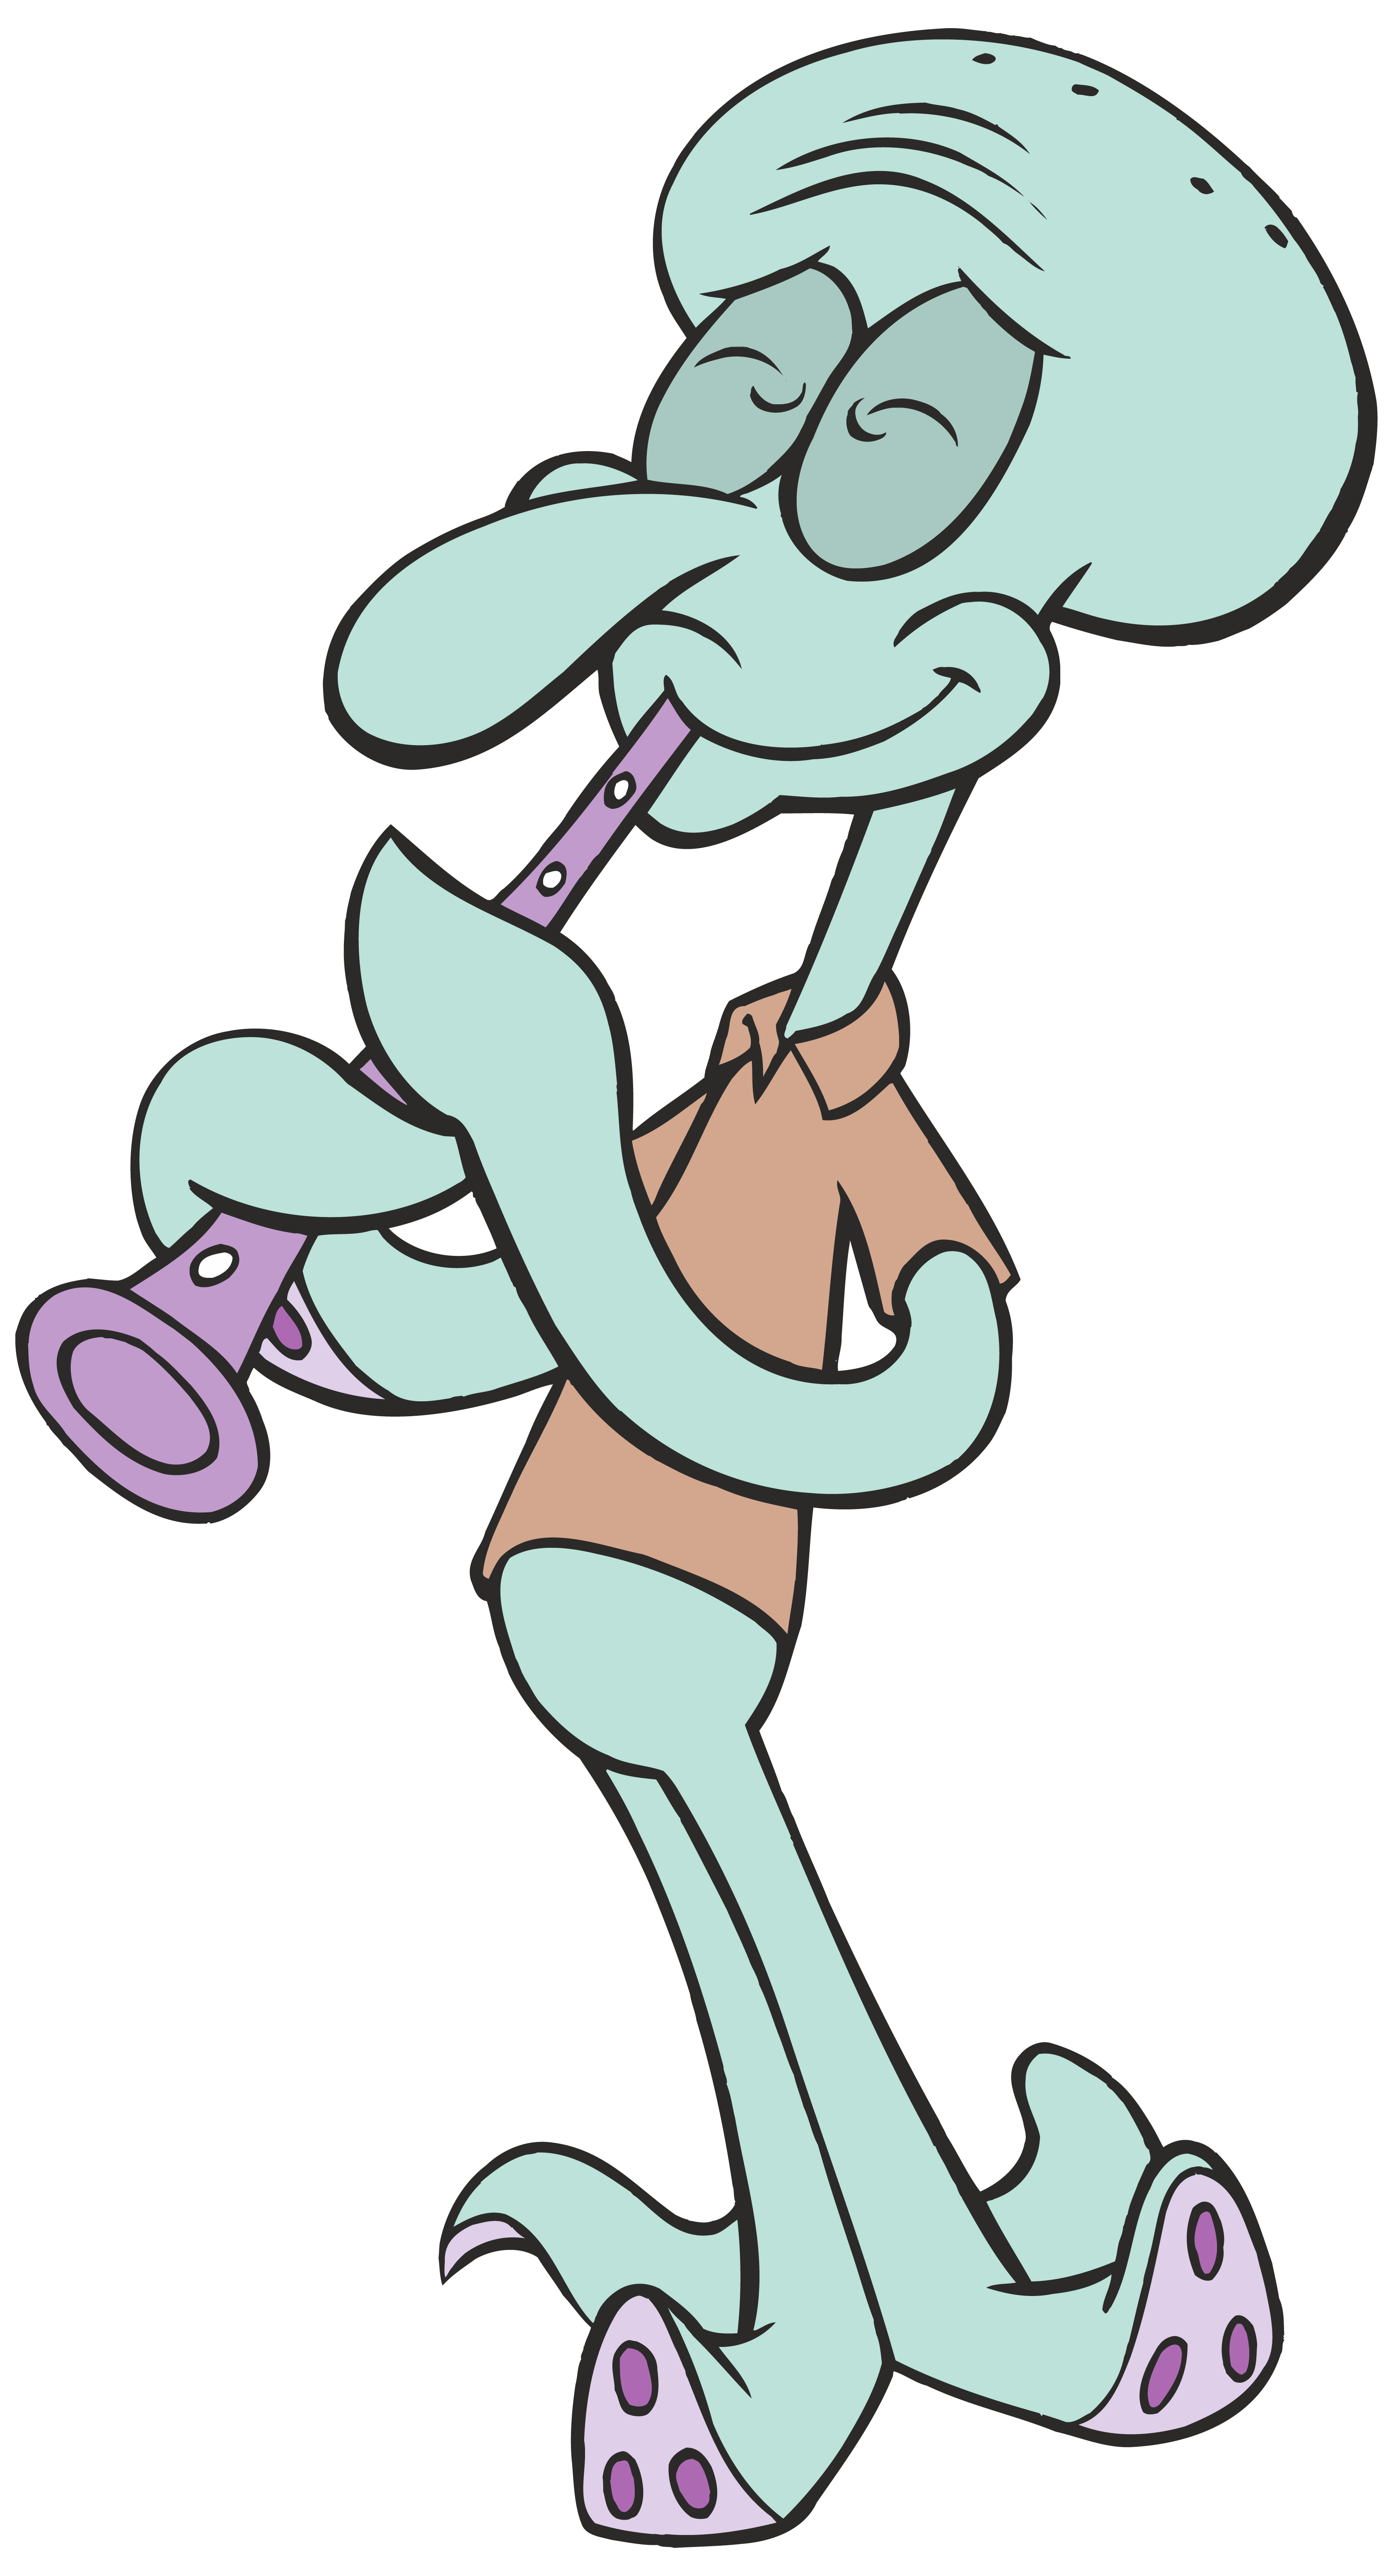 Parade clipart animated. Squidward tentacles spongebob png